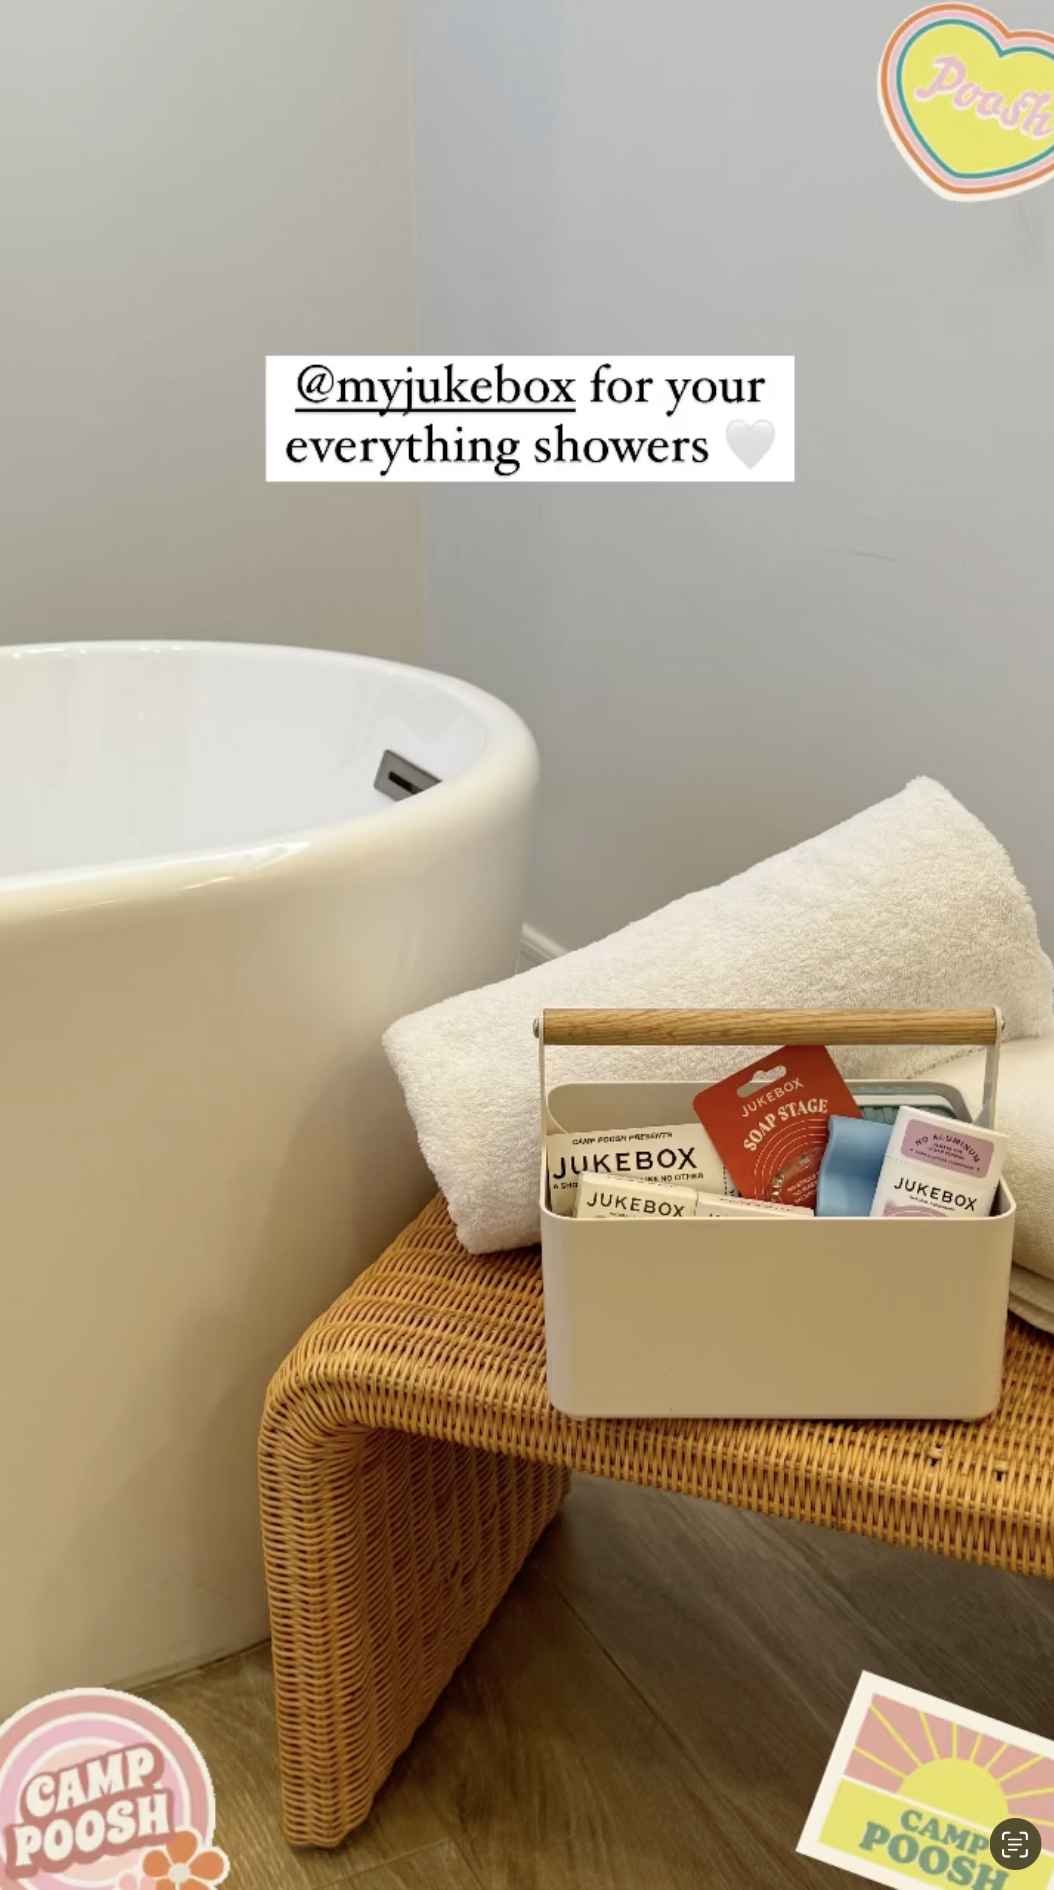 Jukebox products were made available for baths and showers